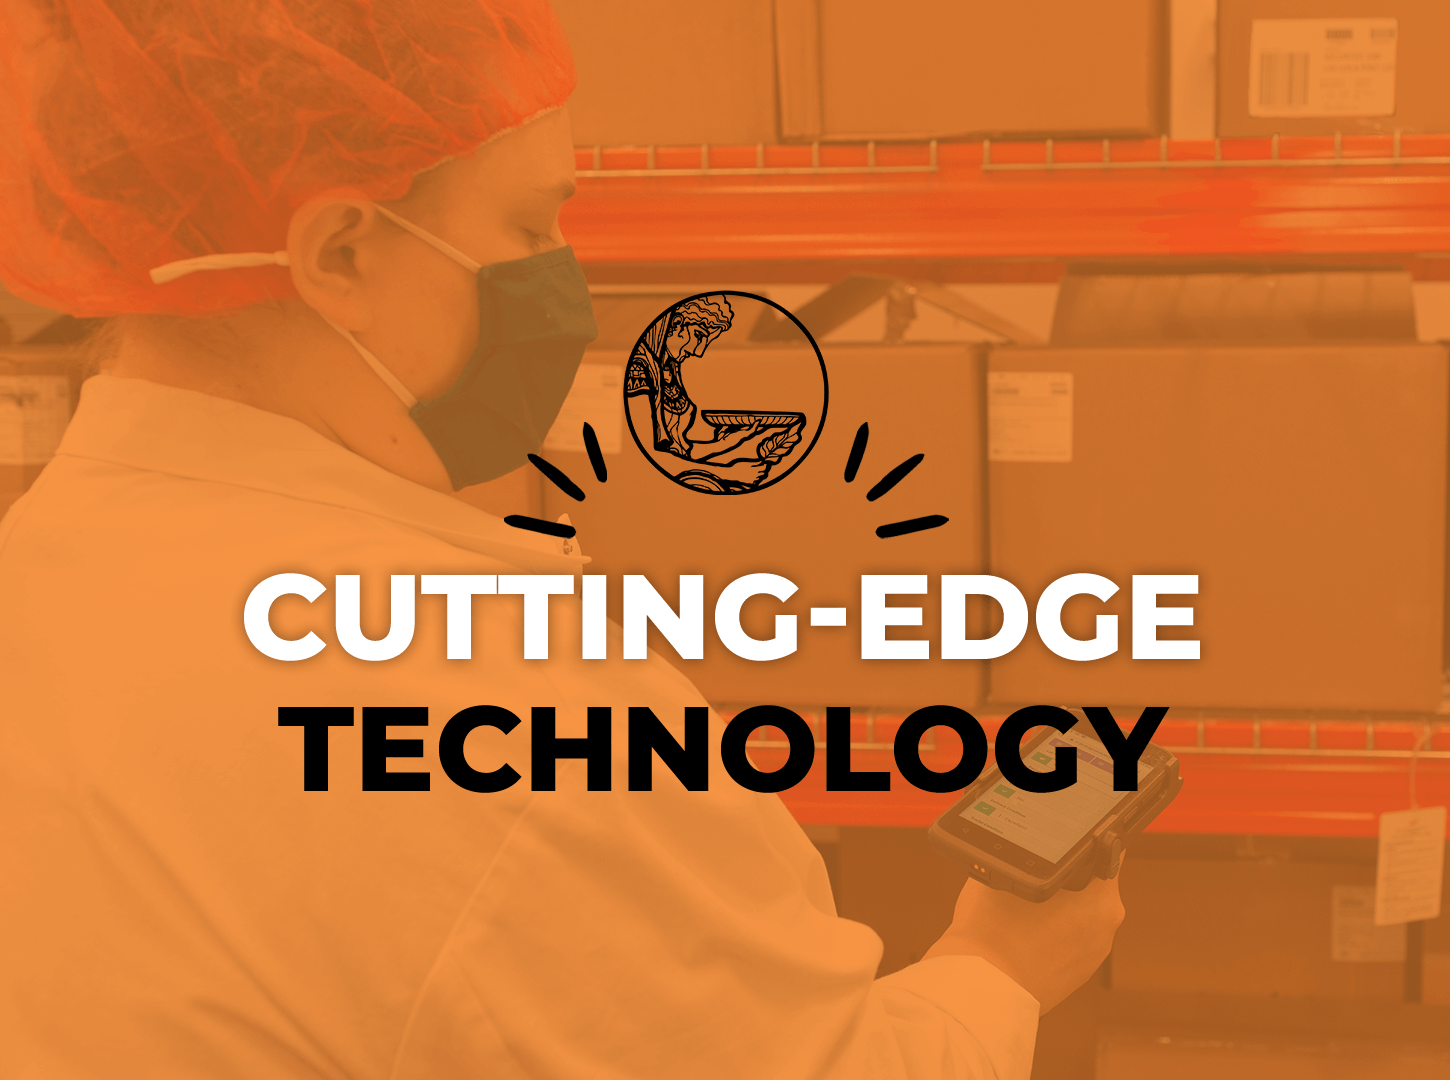 Featured image for “Cutting-Edge Technology for the Food and Beverage Industry”